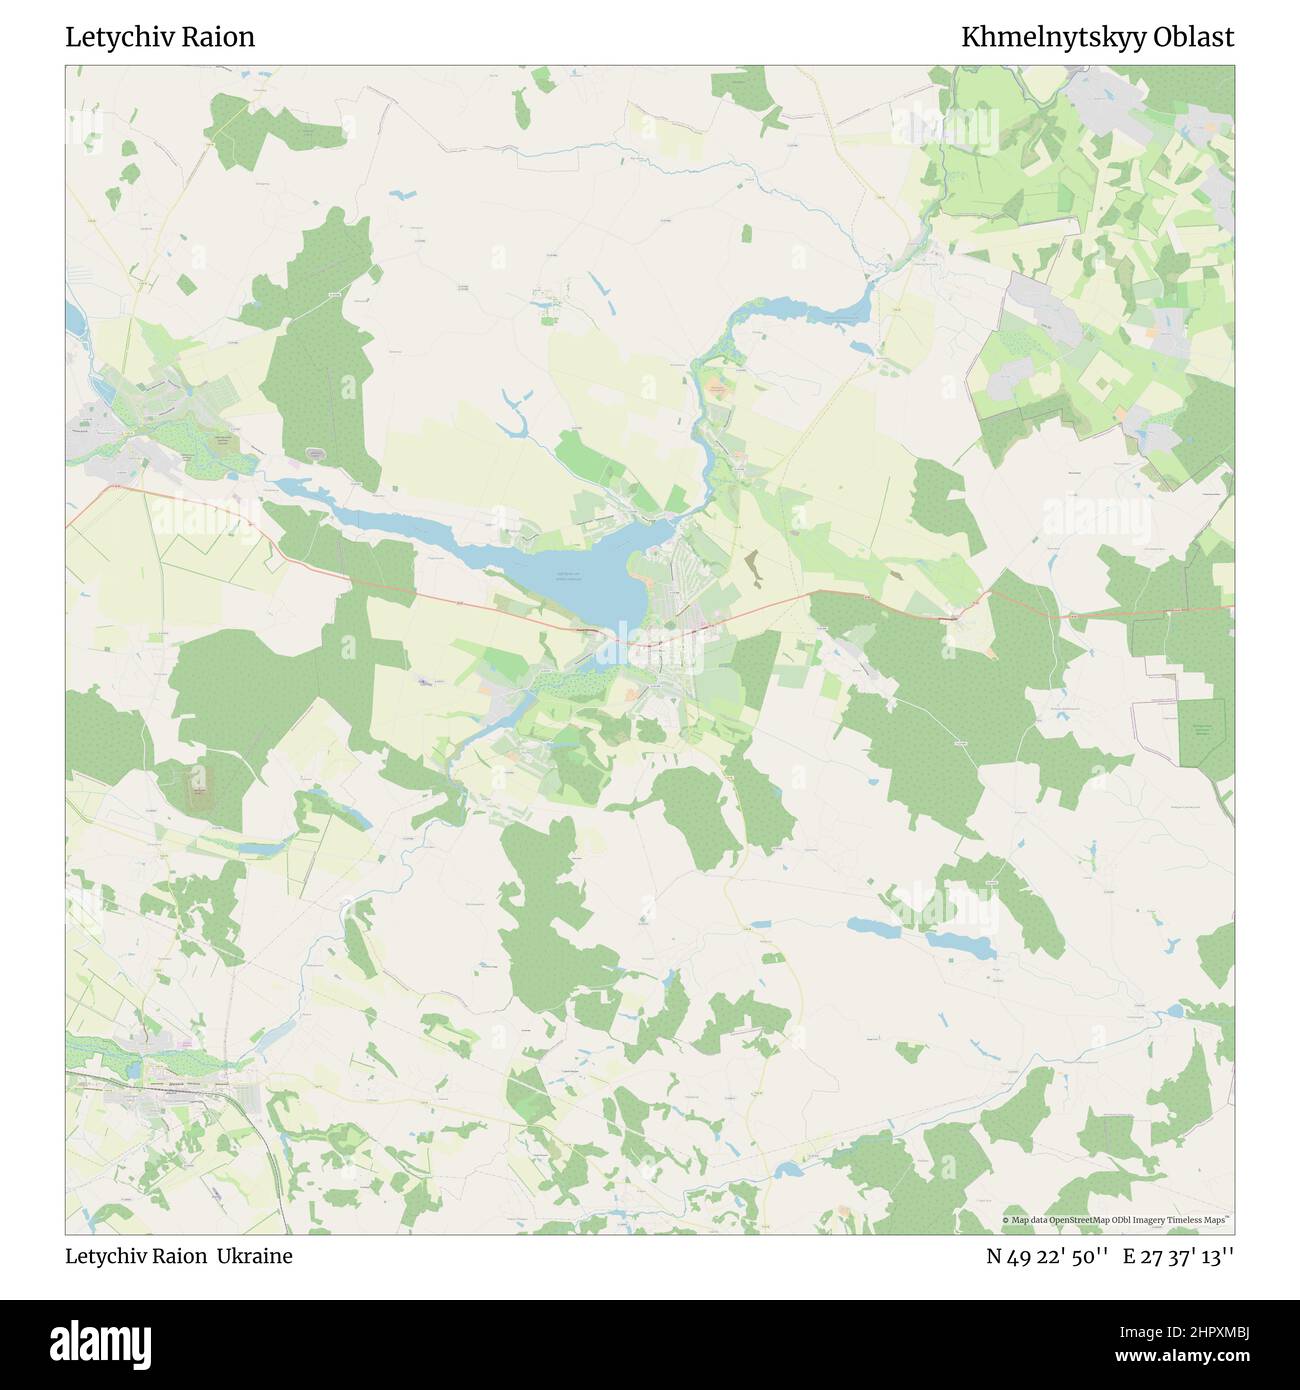 Letychiv Raion, Letychiv Raion, Ukraine, Khmelnytskyy Oblast, N 49 22' 50'', E 27 37' 13'', map, Timeless Map published in 2021. Travelers, explorers and adventurers like Florence Nightingale, David Livingstone, Ernest Shackleton, Lewis and Clark and Sherlock Holmes relied on maps to plan travels to the world's most remote corners, Timeless Maps is mapping most locations on the globe, showing the achievement of great dreams Stock Photo